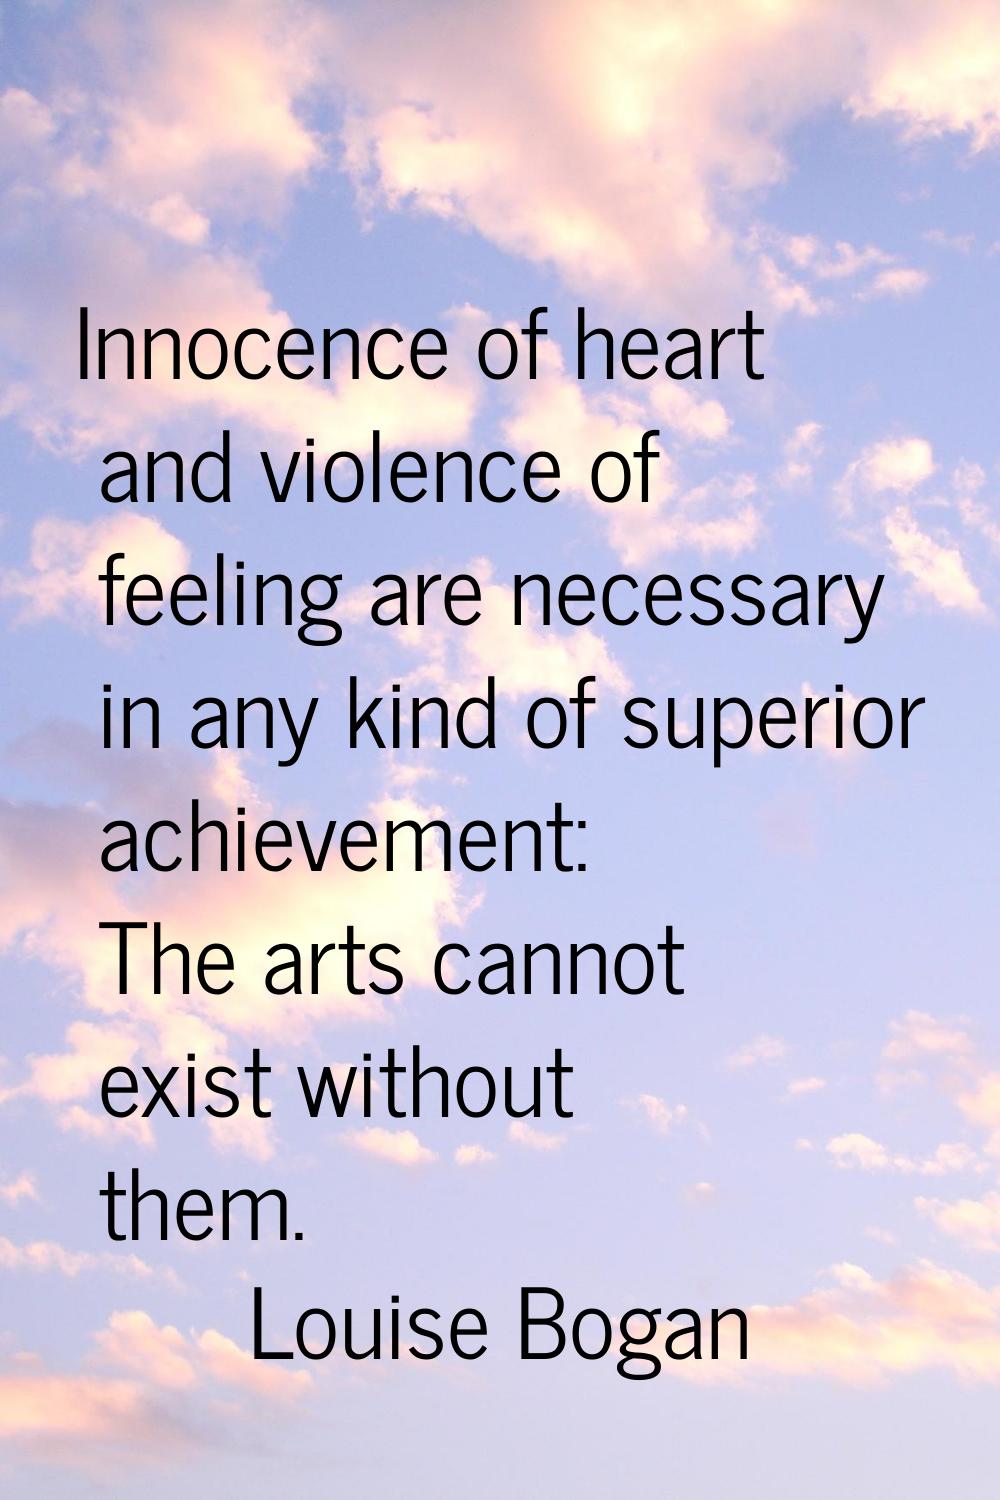 Innocence of heart and violence of feeling are necessary in any kind of superior achievement: The a